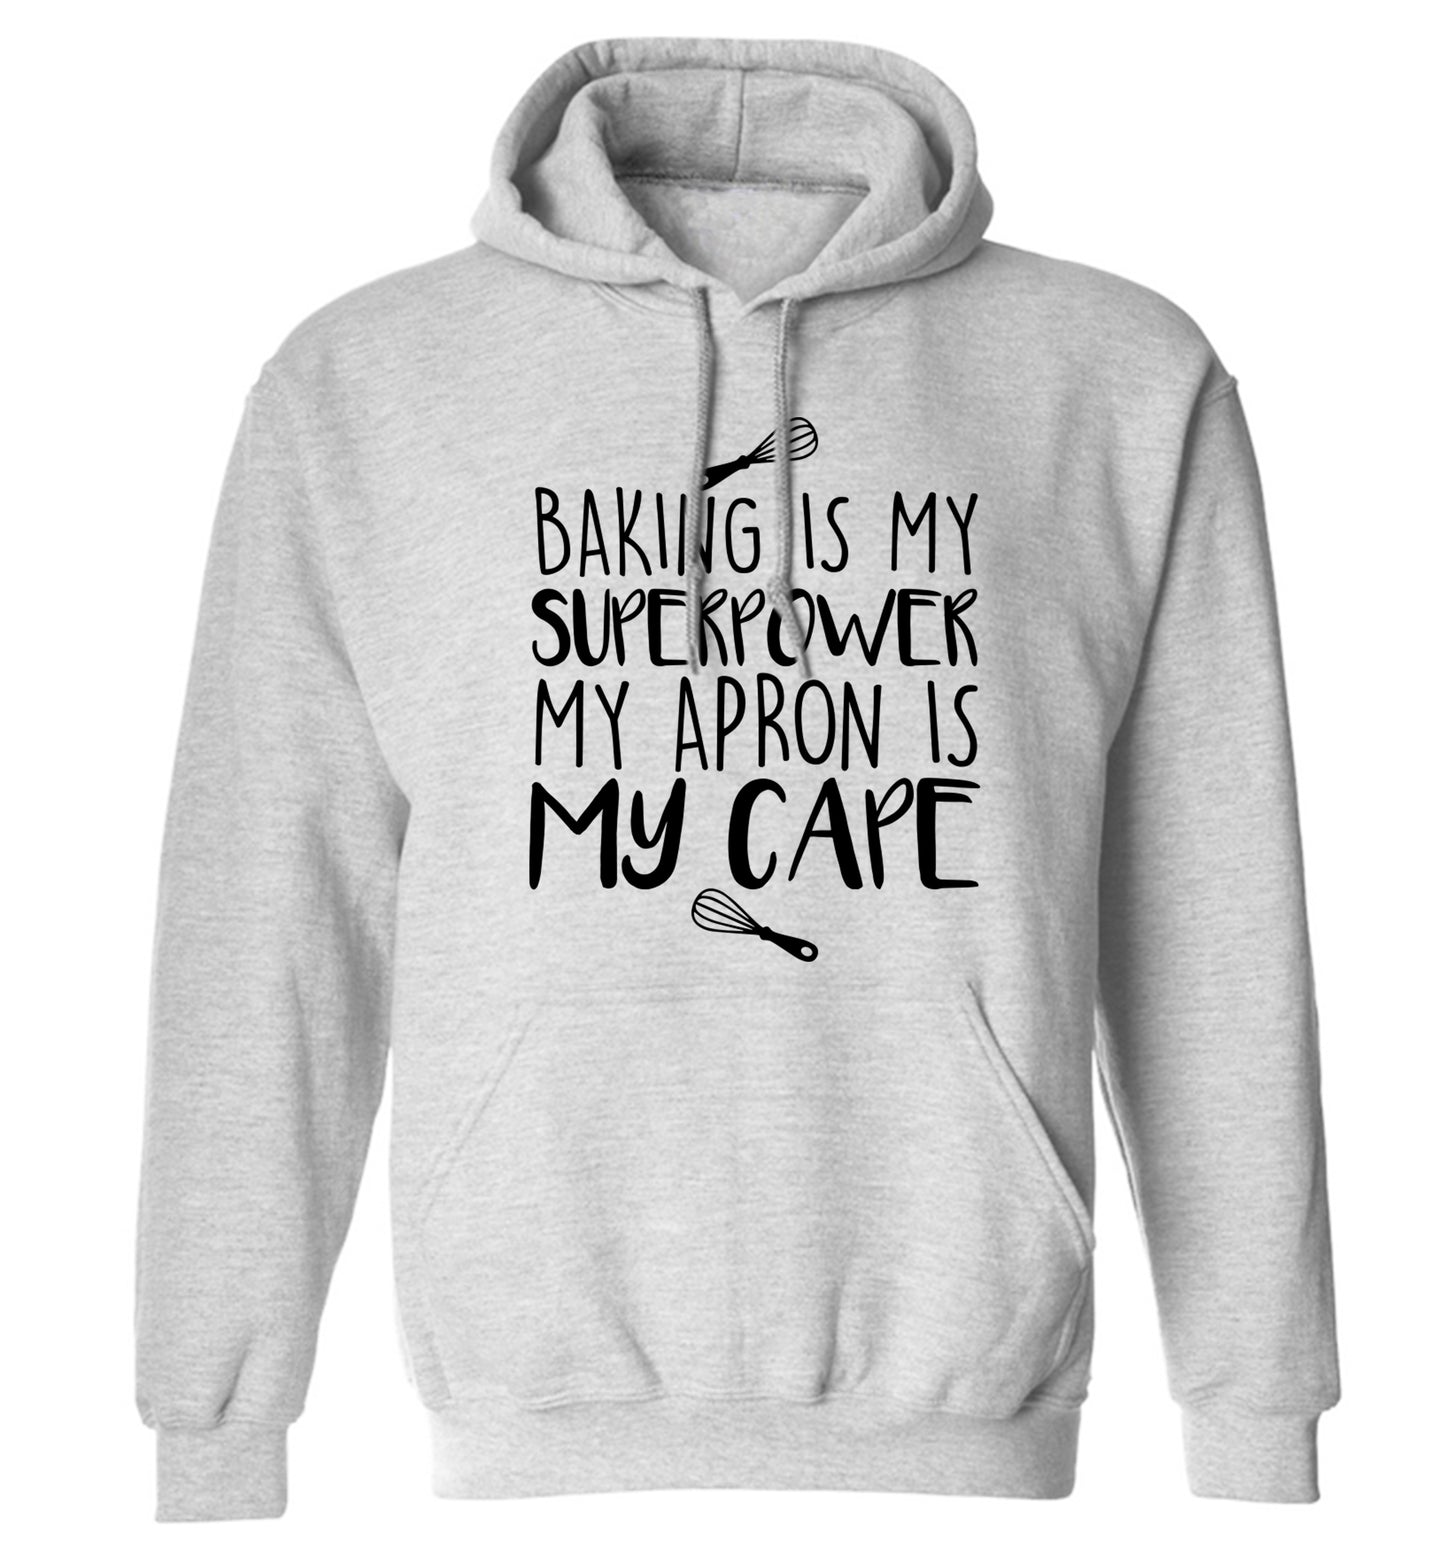 Baking is my superpower my apron is my cape adults unisex grey hoodie 2XL